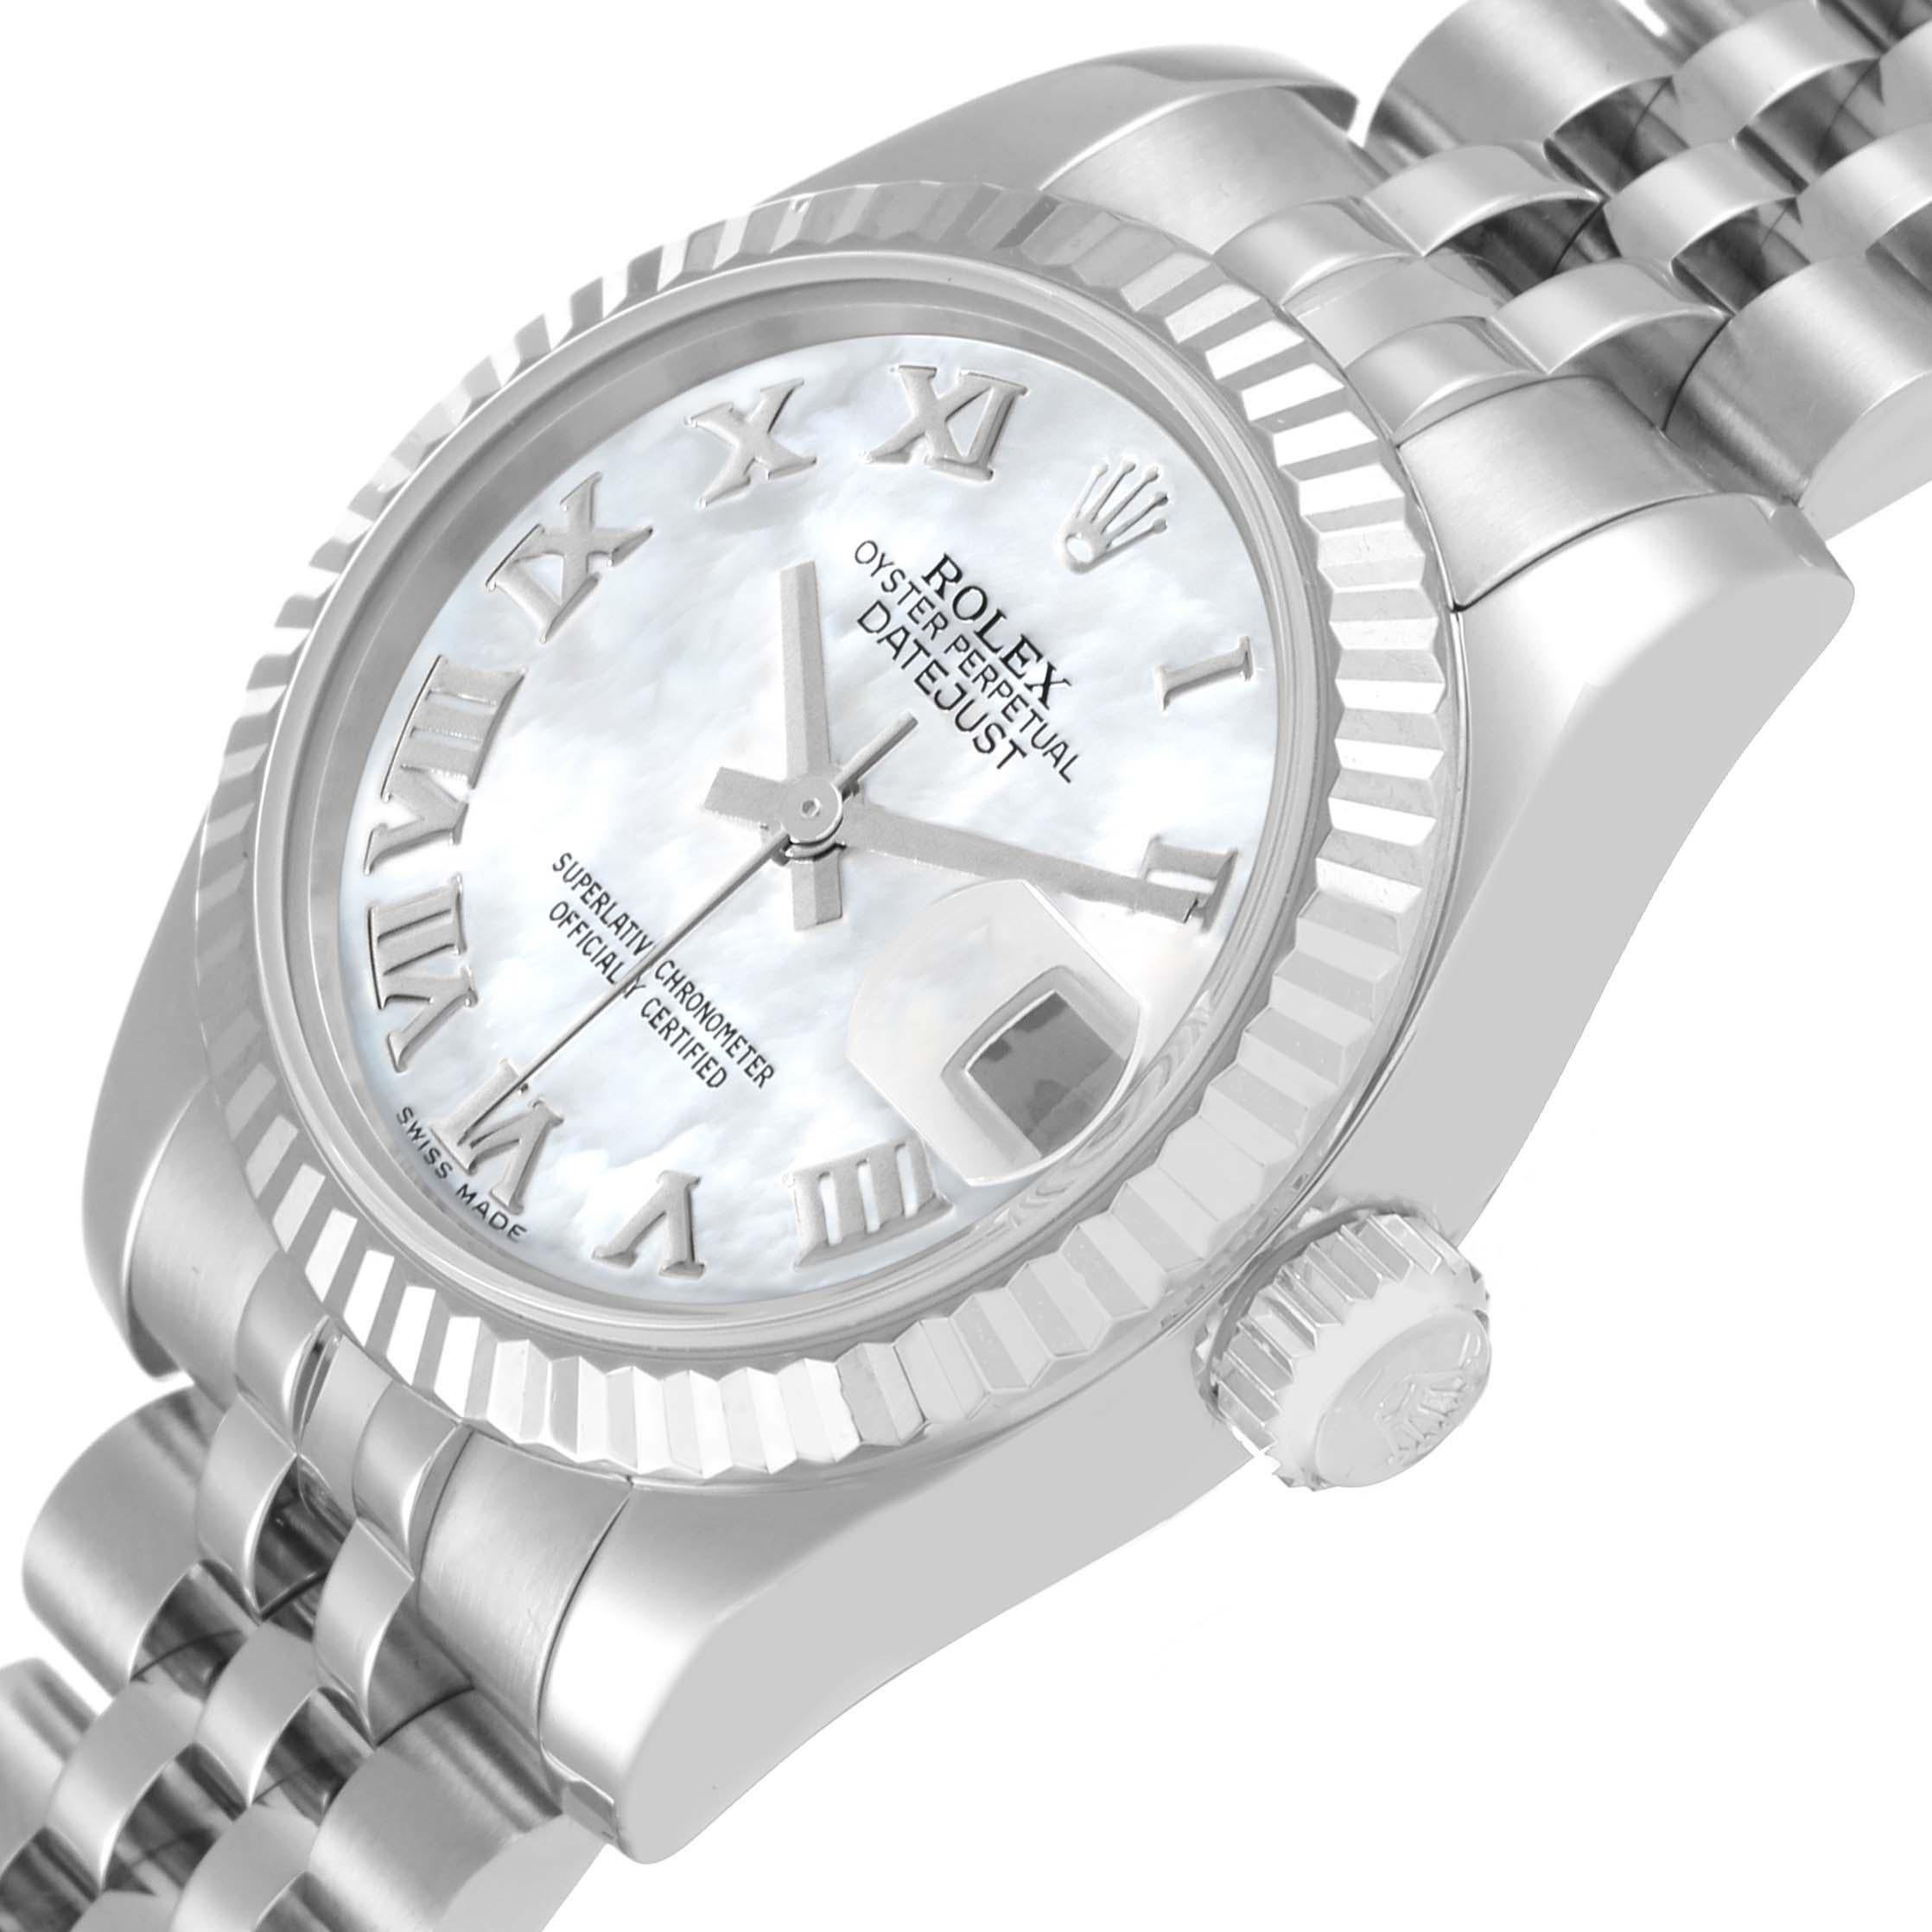 Rolex Datejust Steel White Gold Mother of Pearl Dial Ladies Watch 179174 For Sale 1